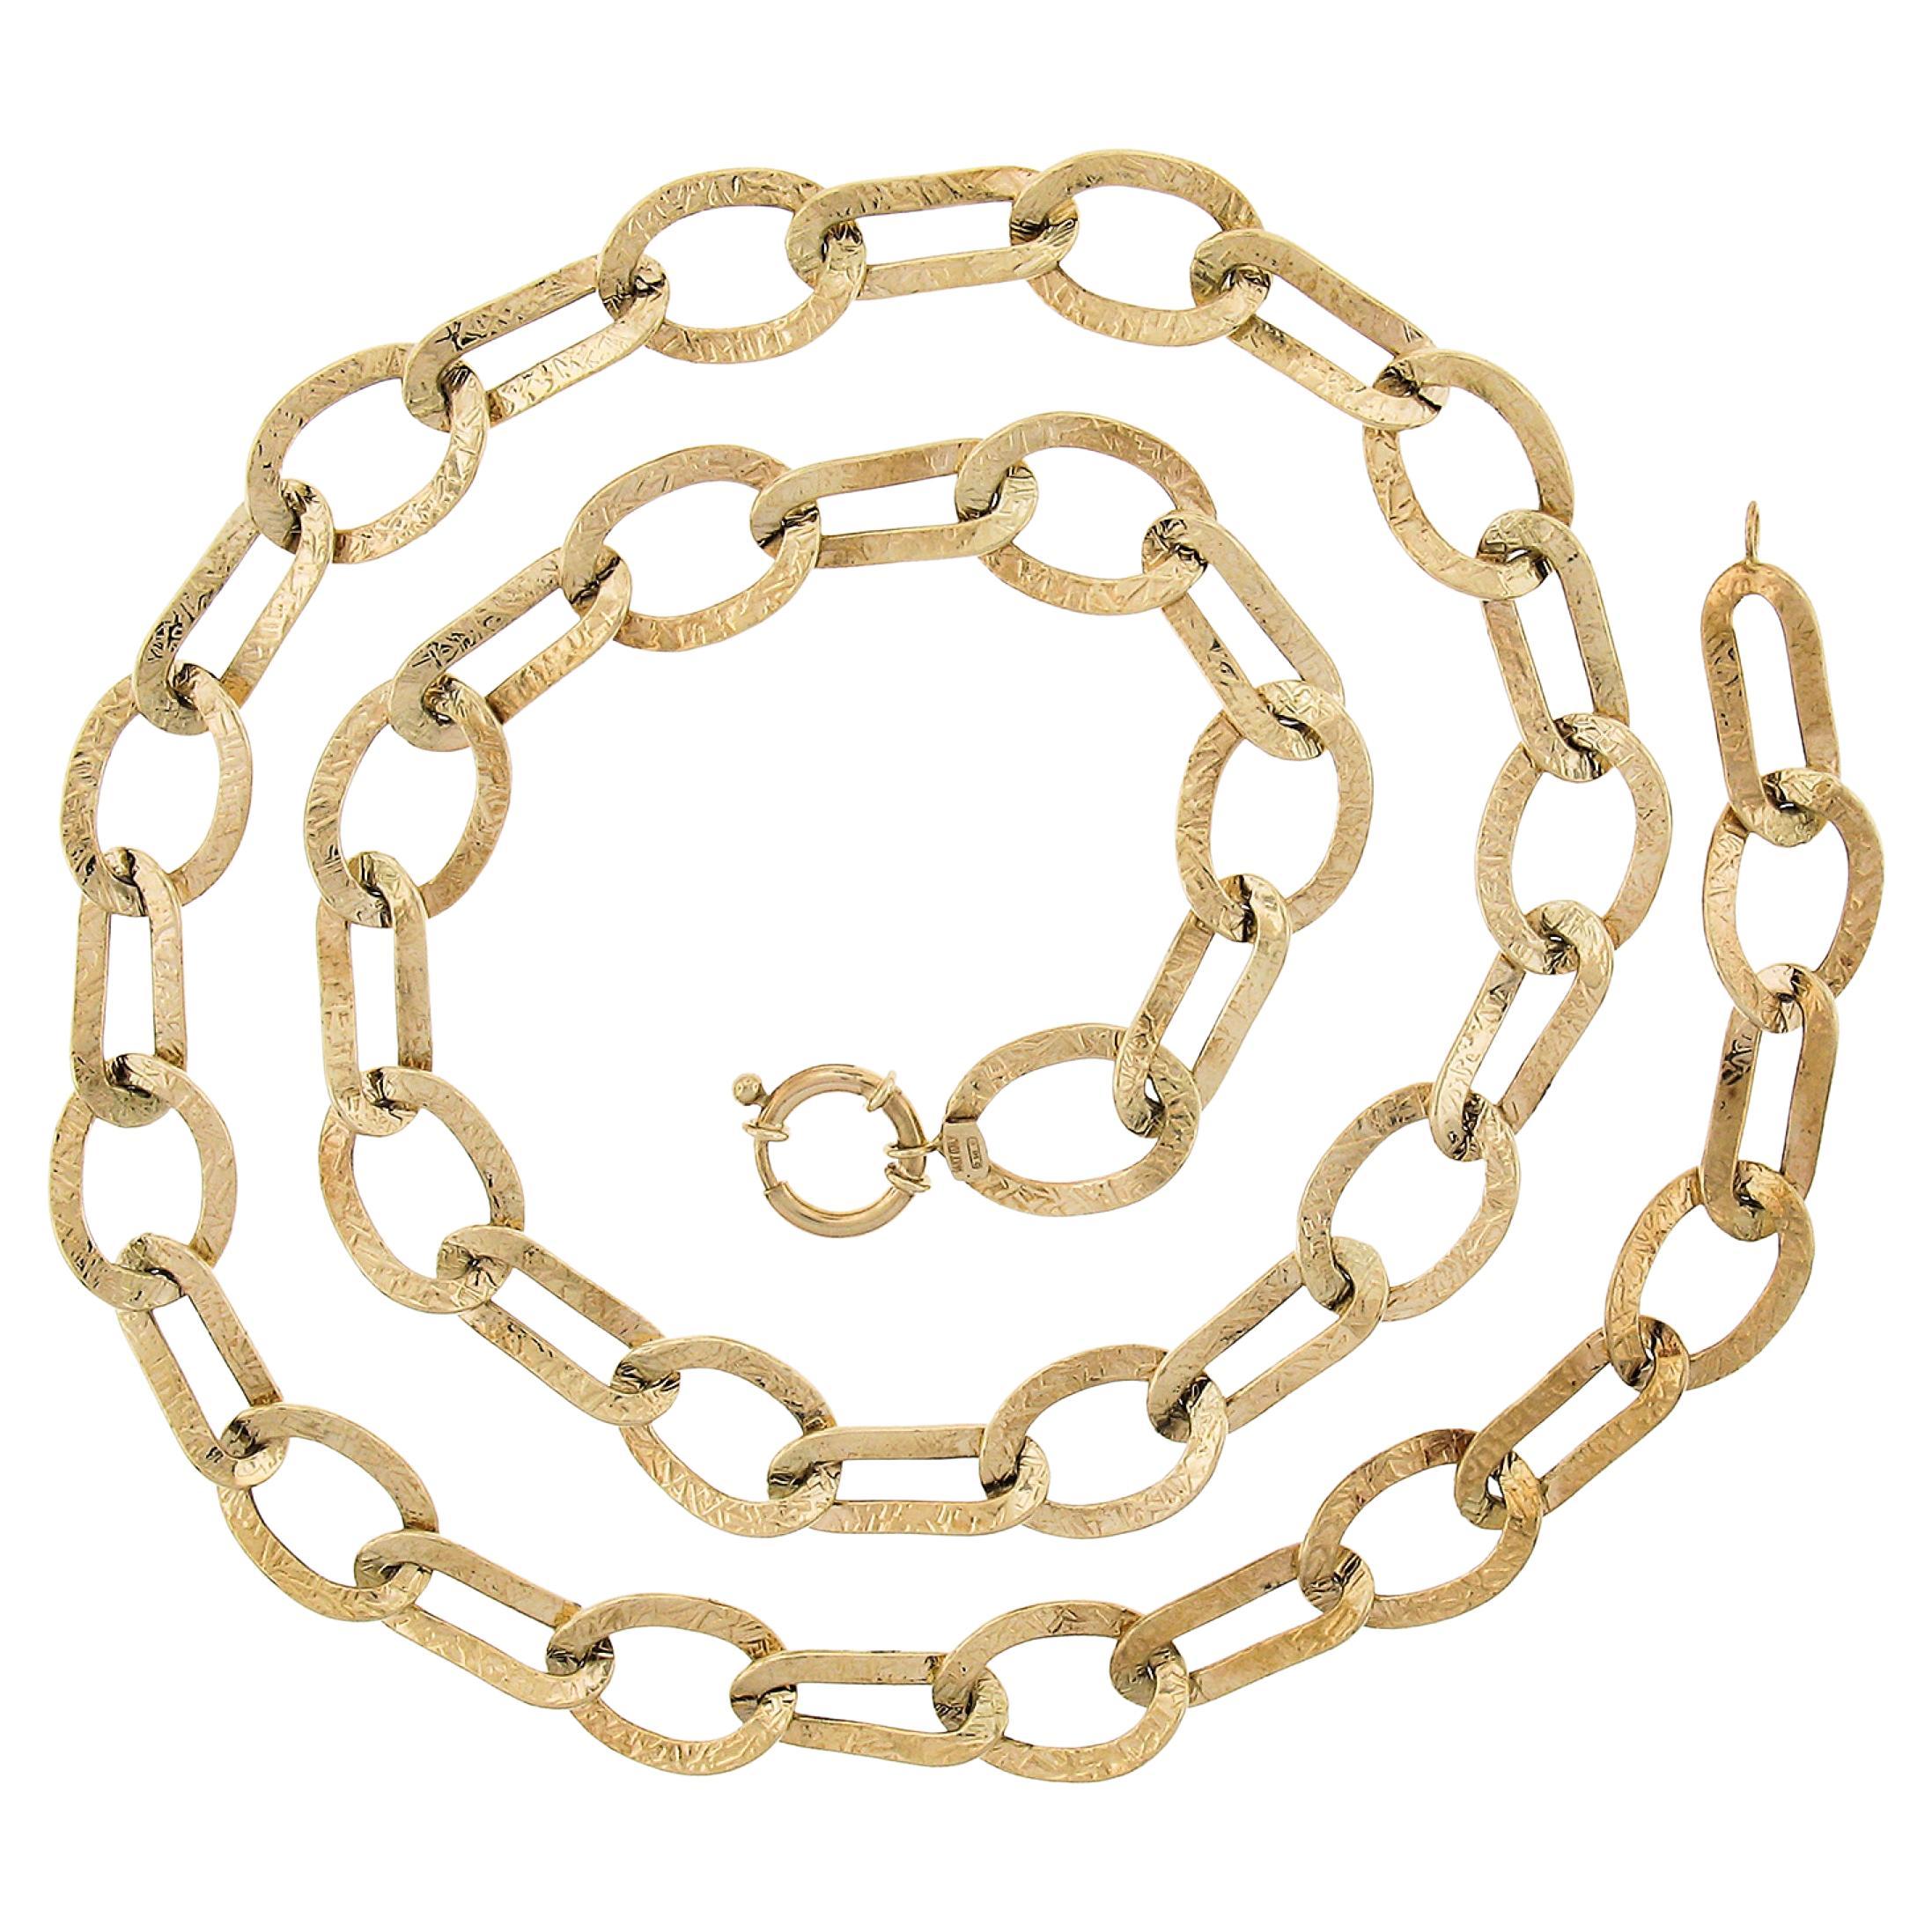 Italian 14K Yellow Gold Long 24" Big Look Textured Open Link Chain Necklace